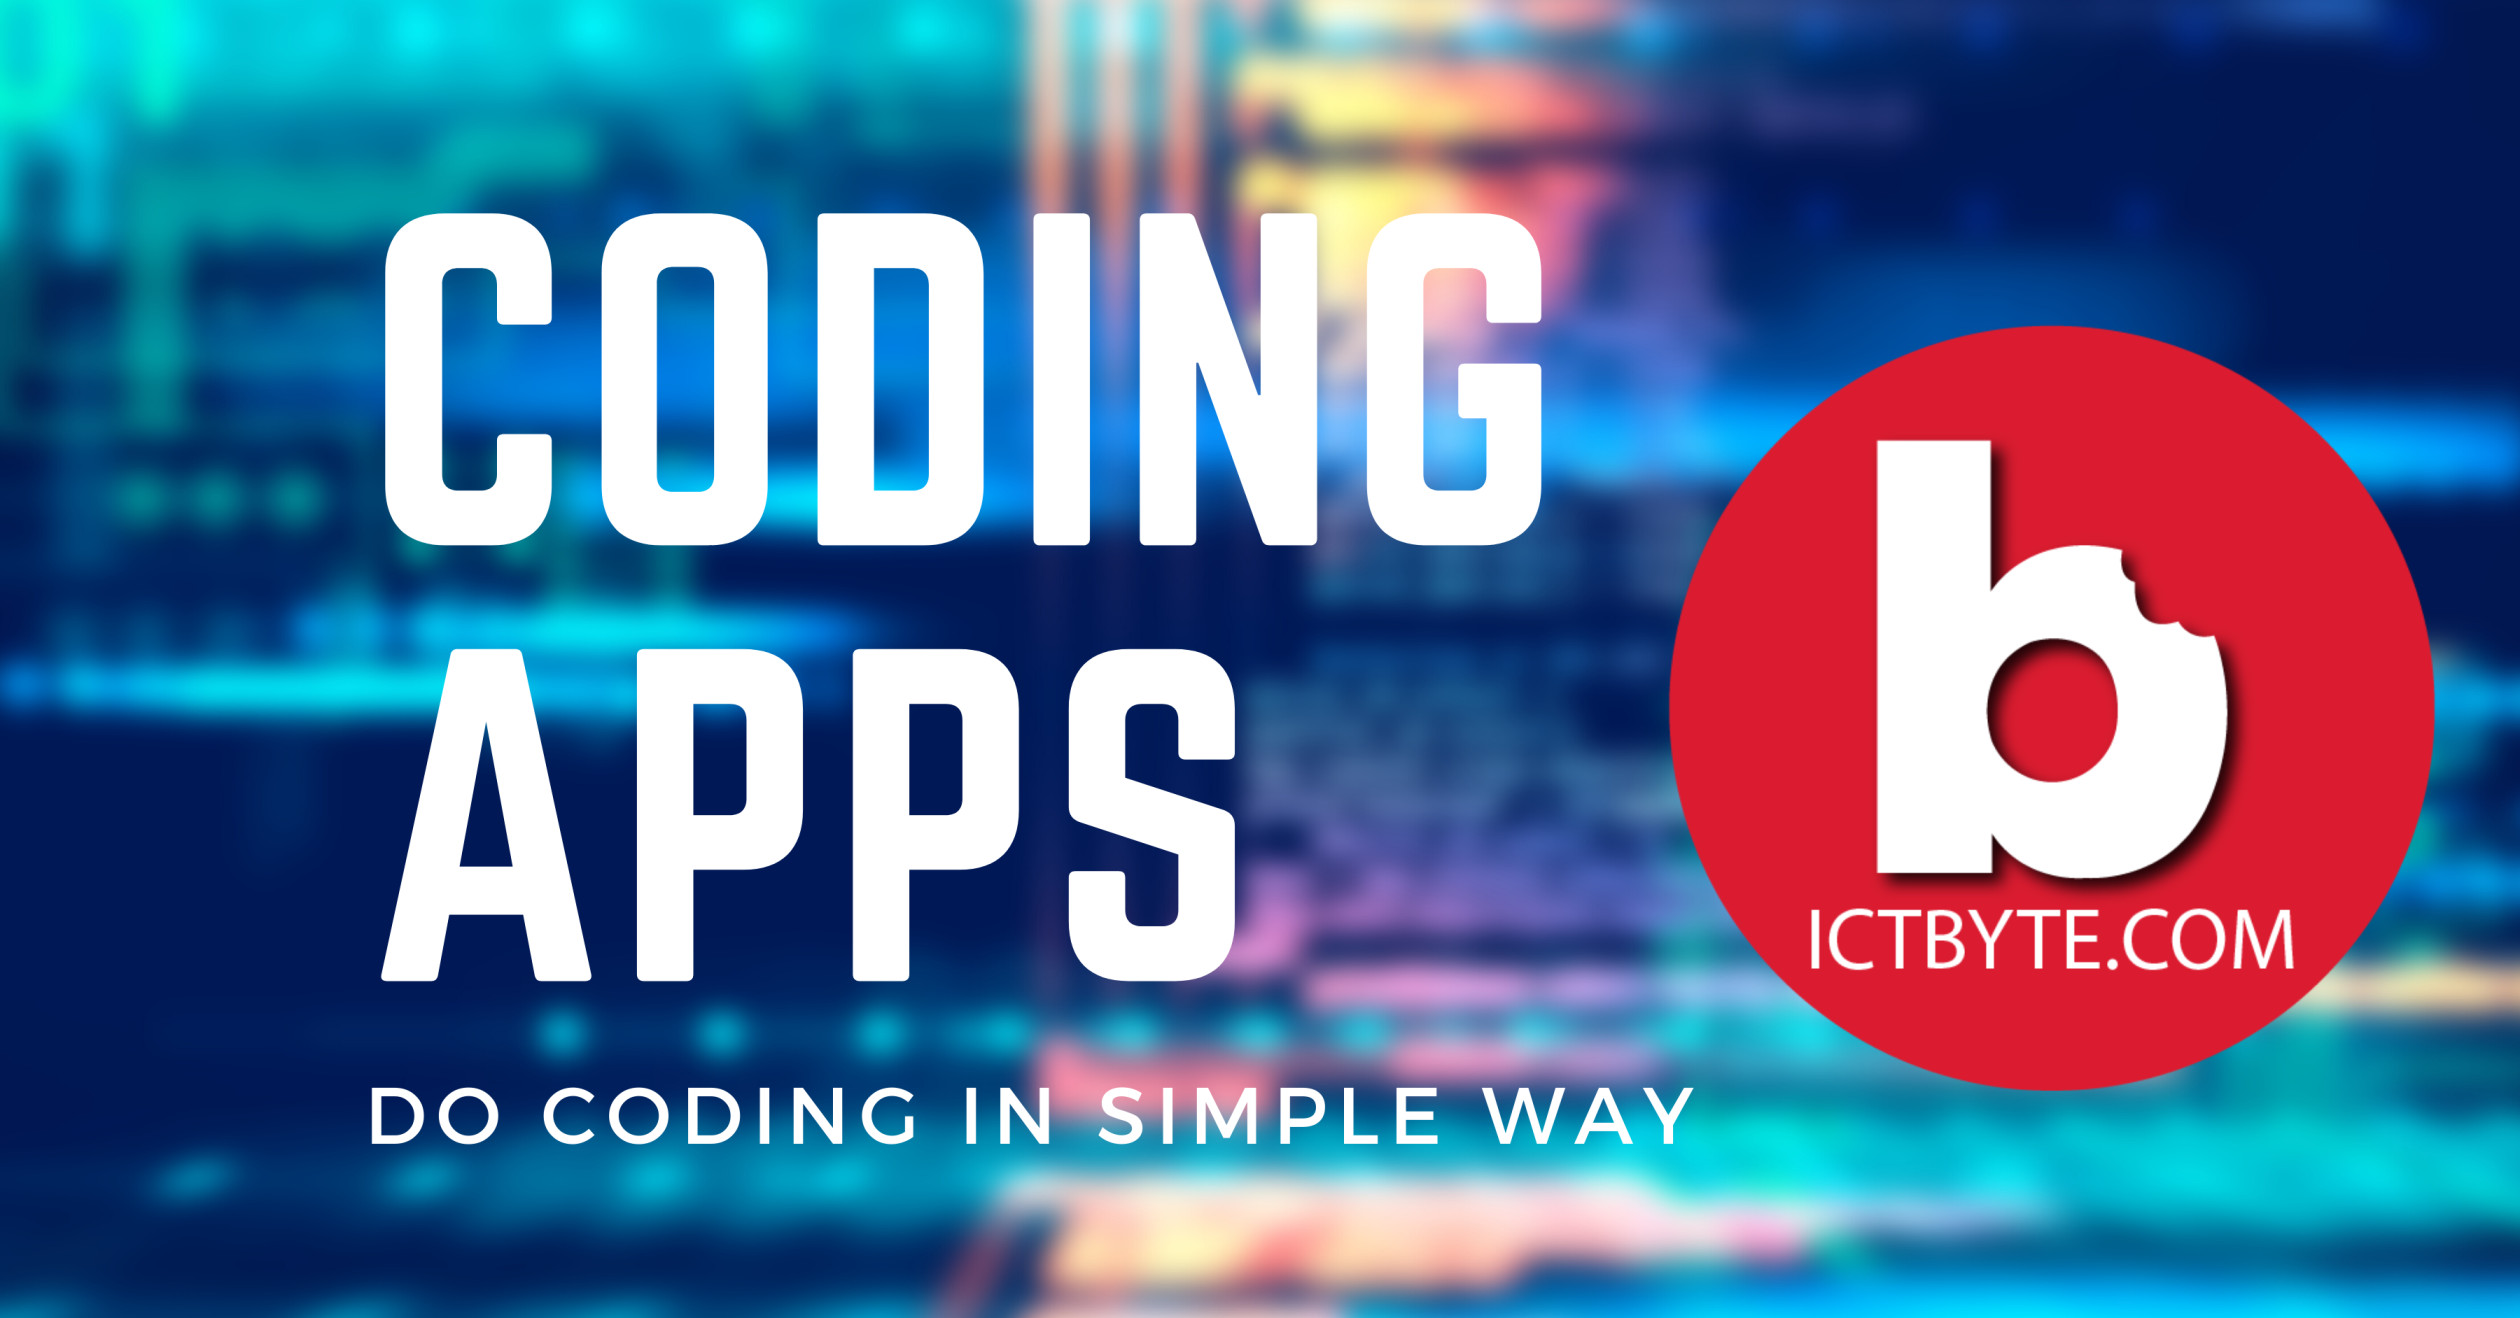 Coding apps